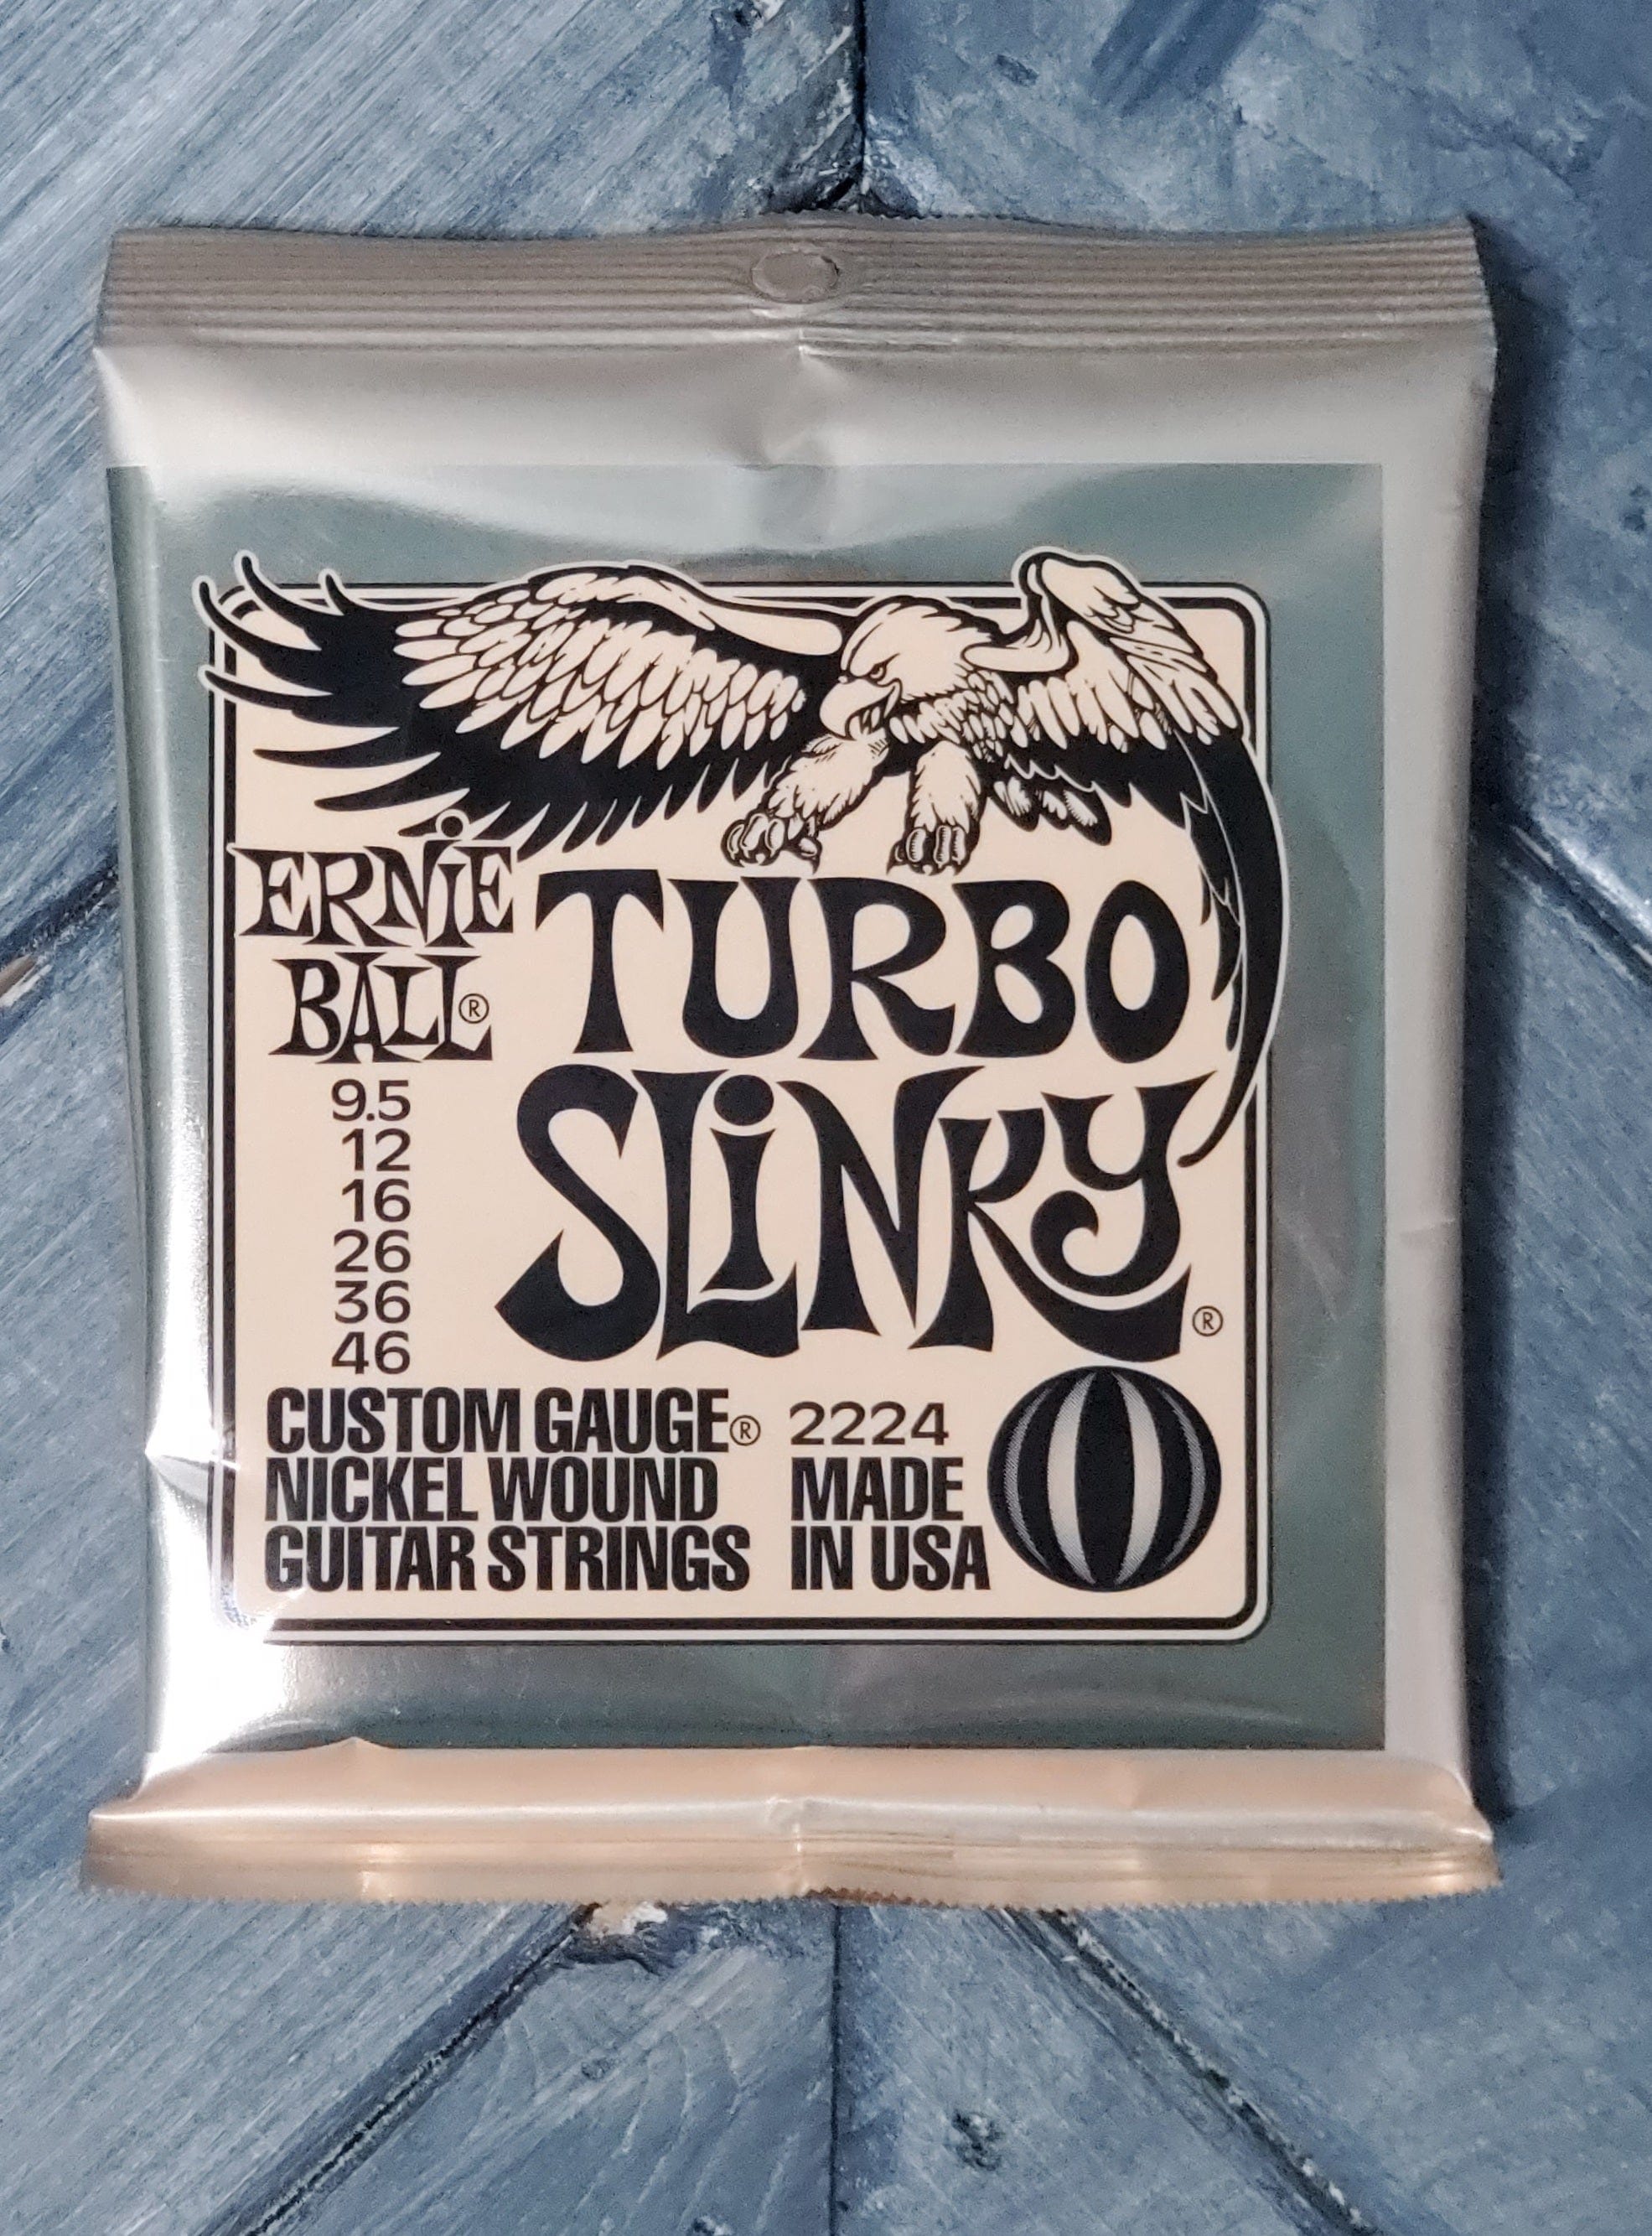 Ernie Ball Turbo Slinky front of the packaging